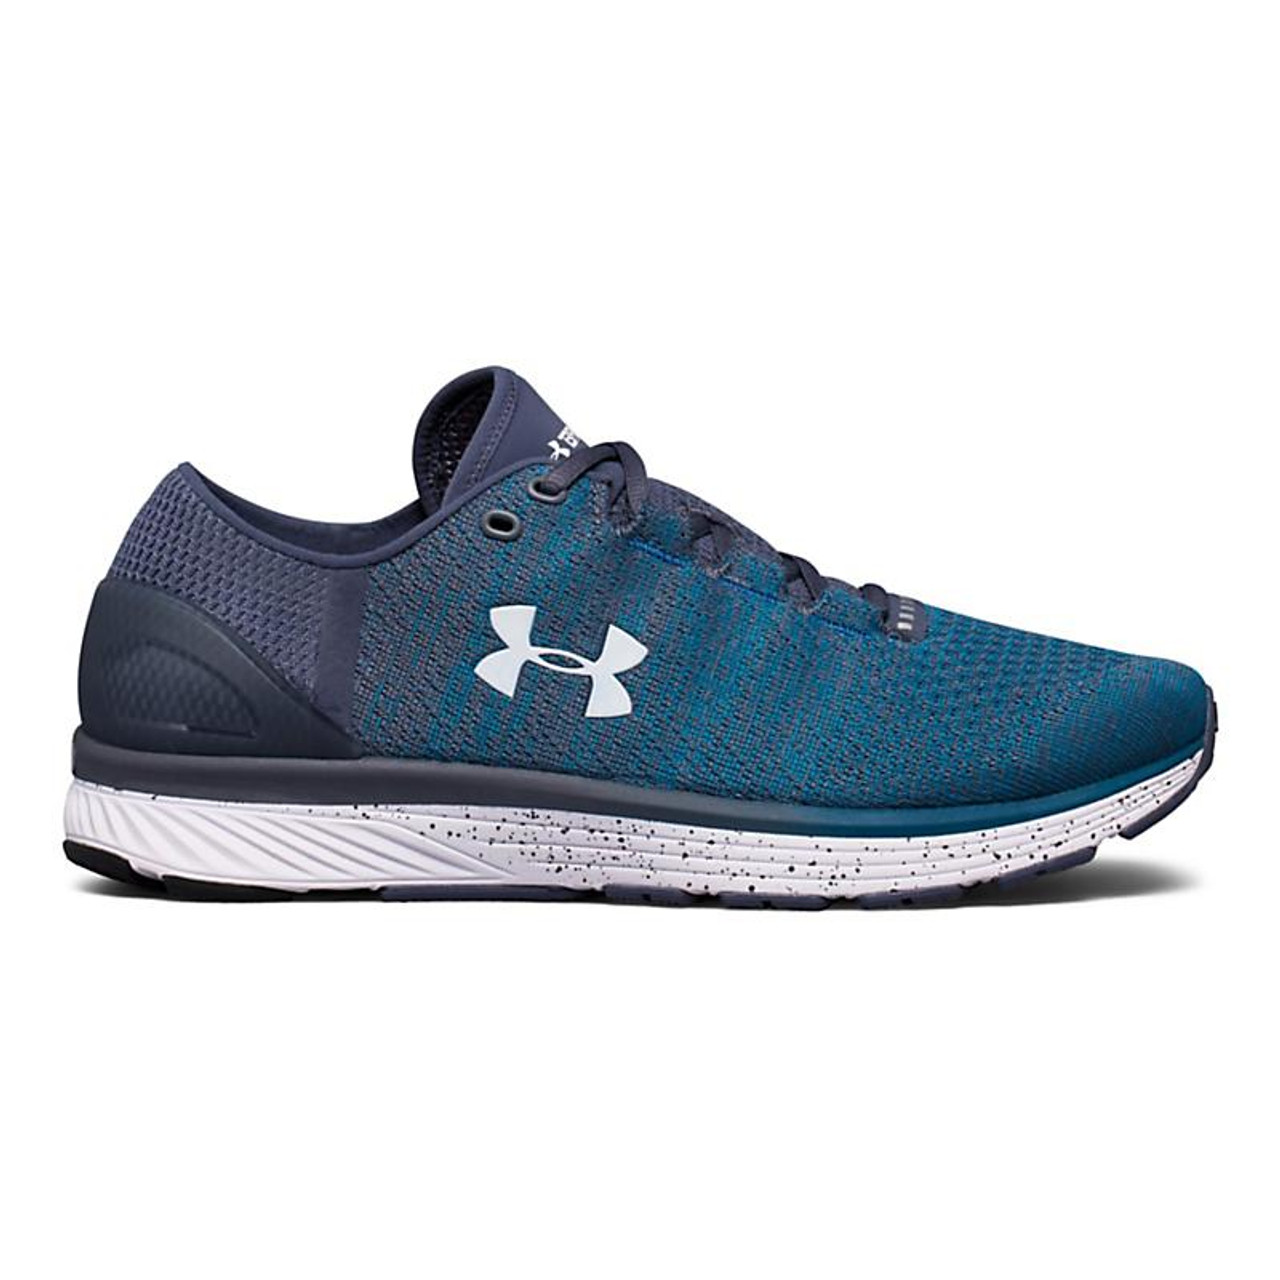 Men's Under Armour Charged Bandit 3 